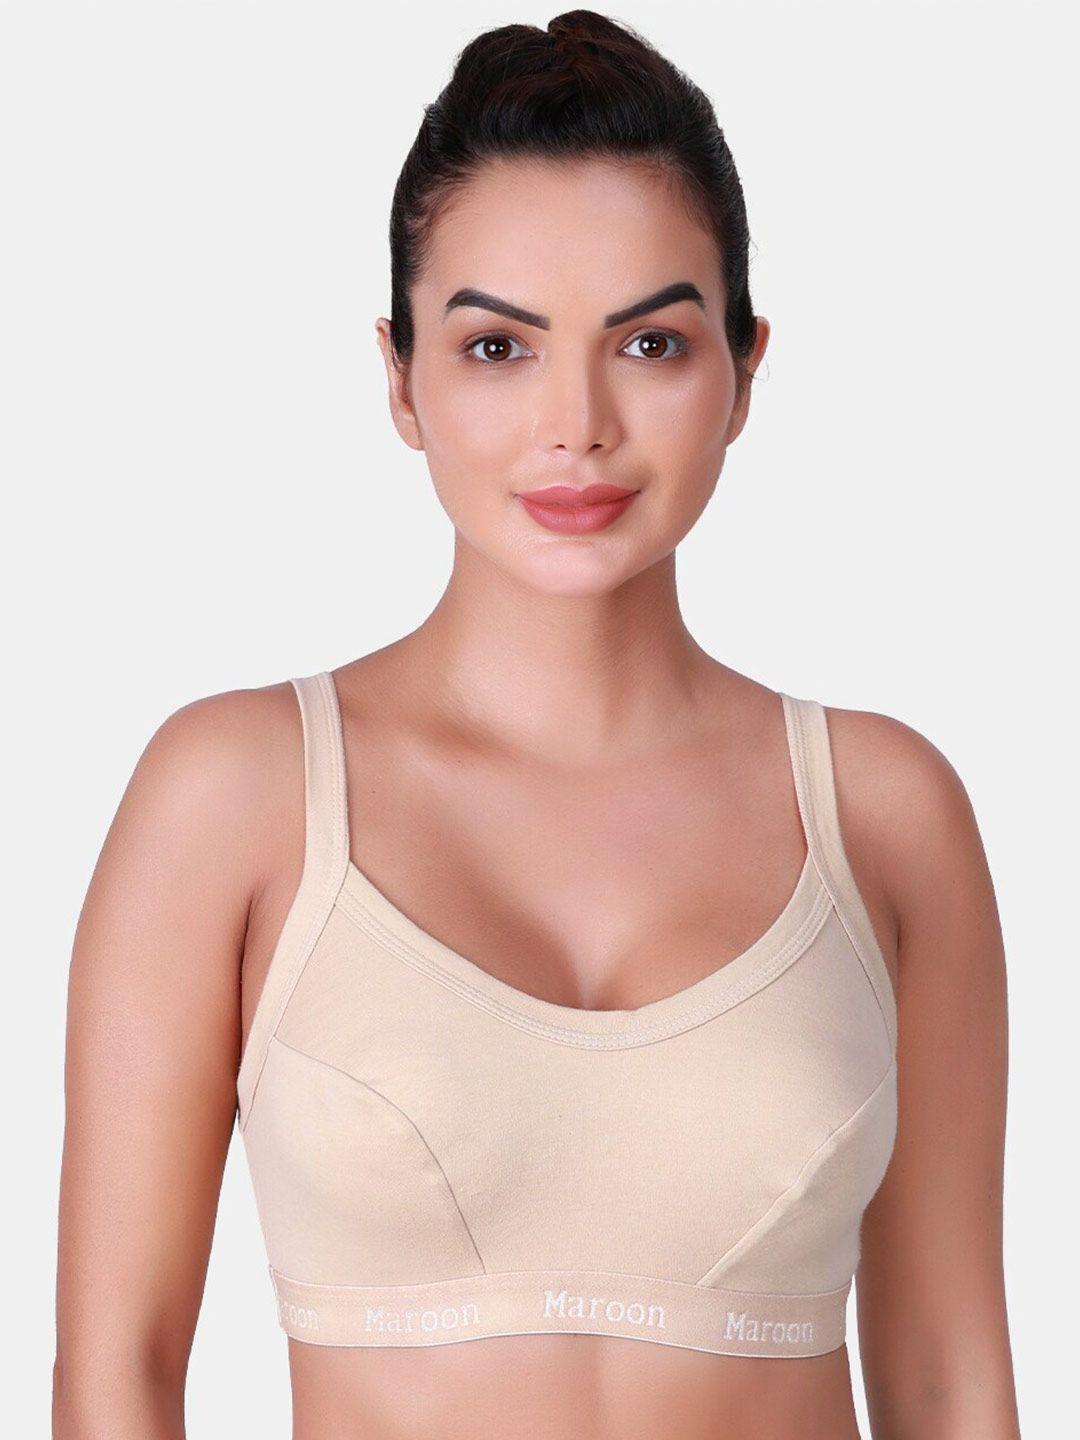 skdreams full coverage cotton bra with all day comfort